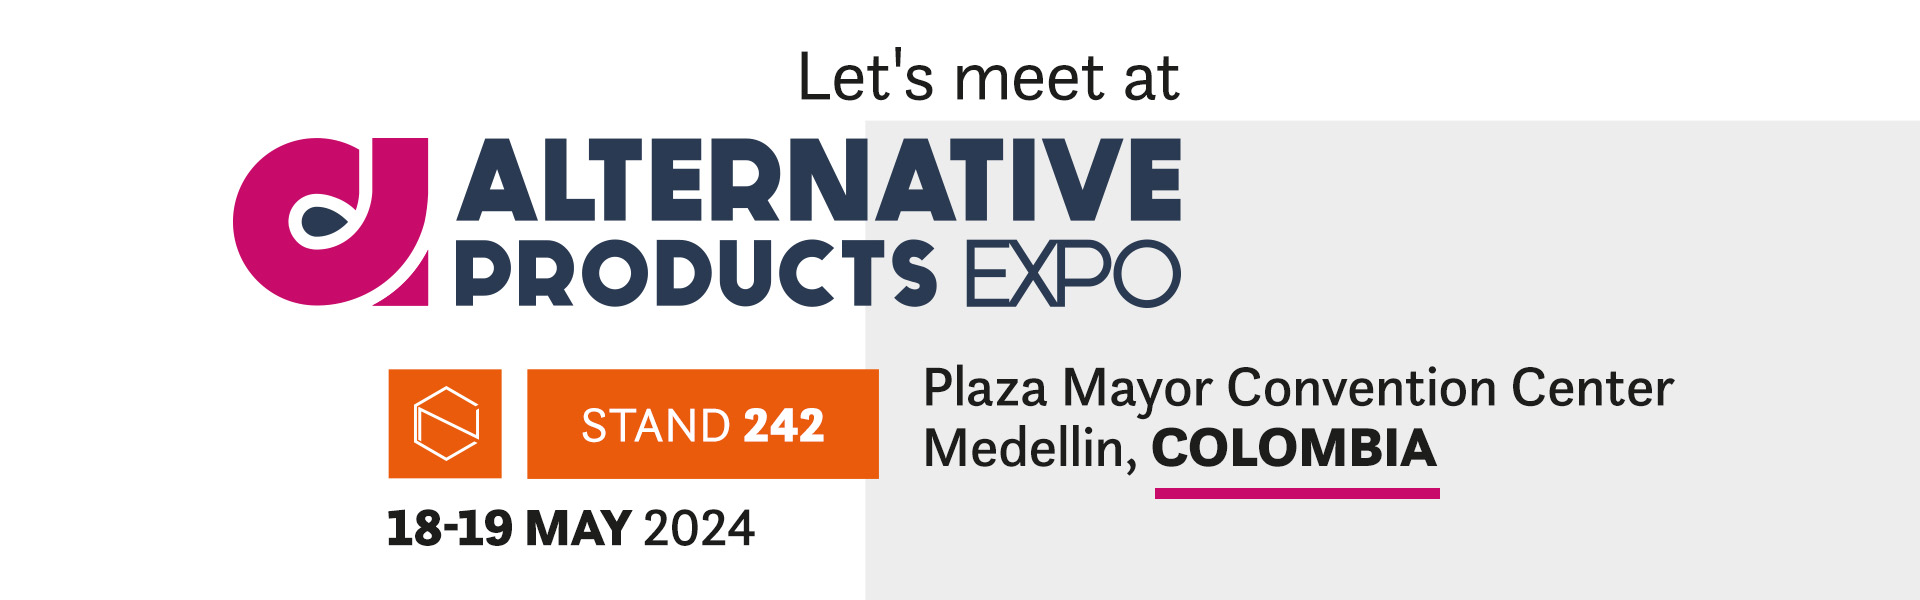 Alternative Products Expo 2024 Colombia